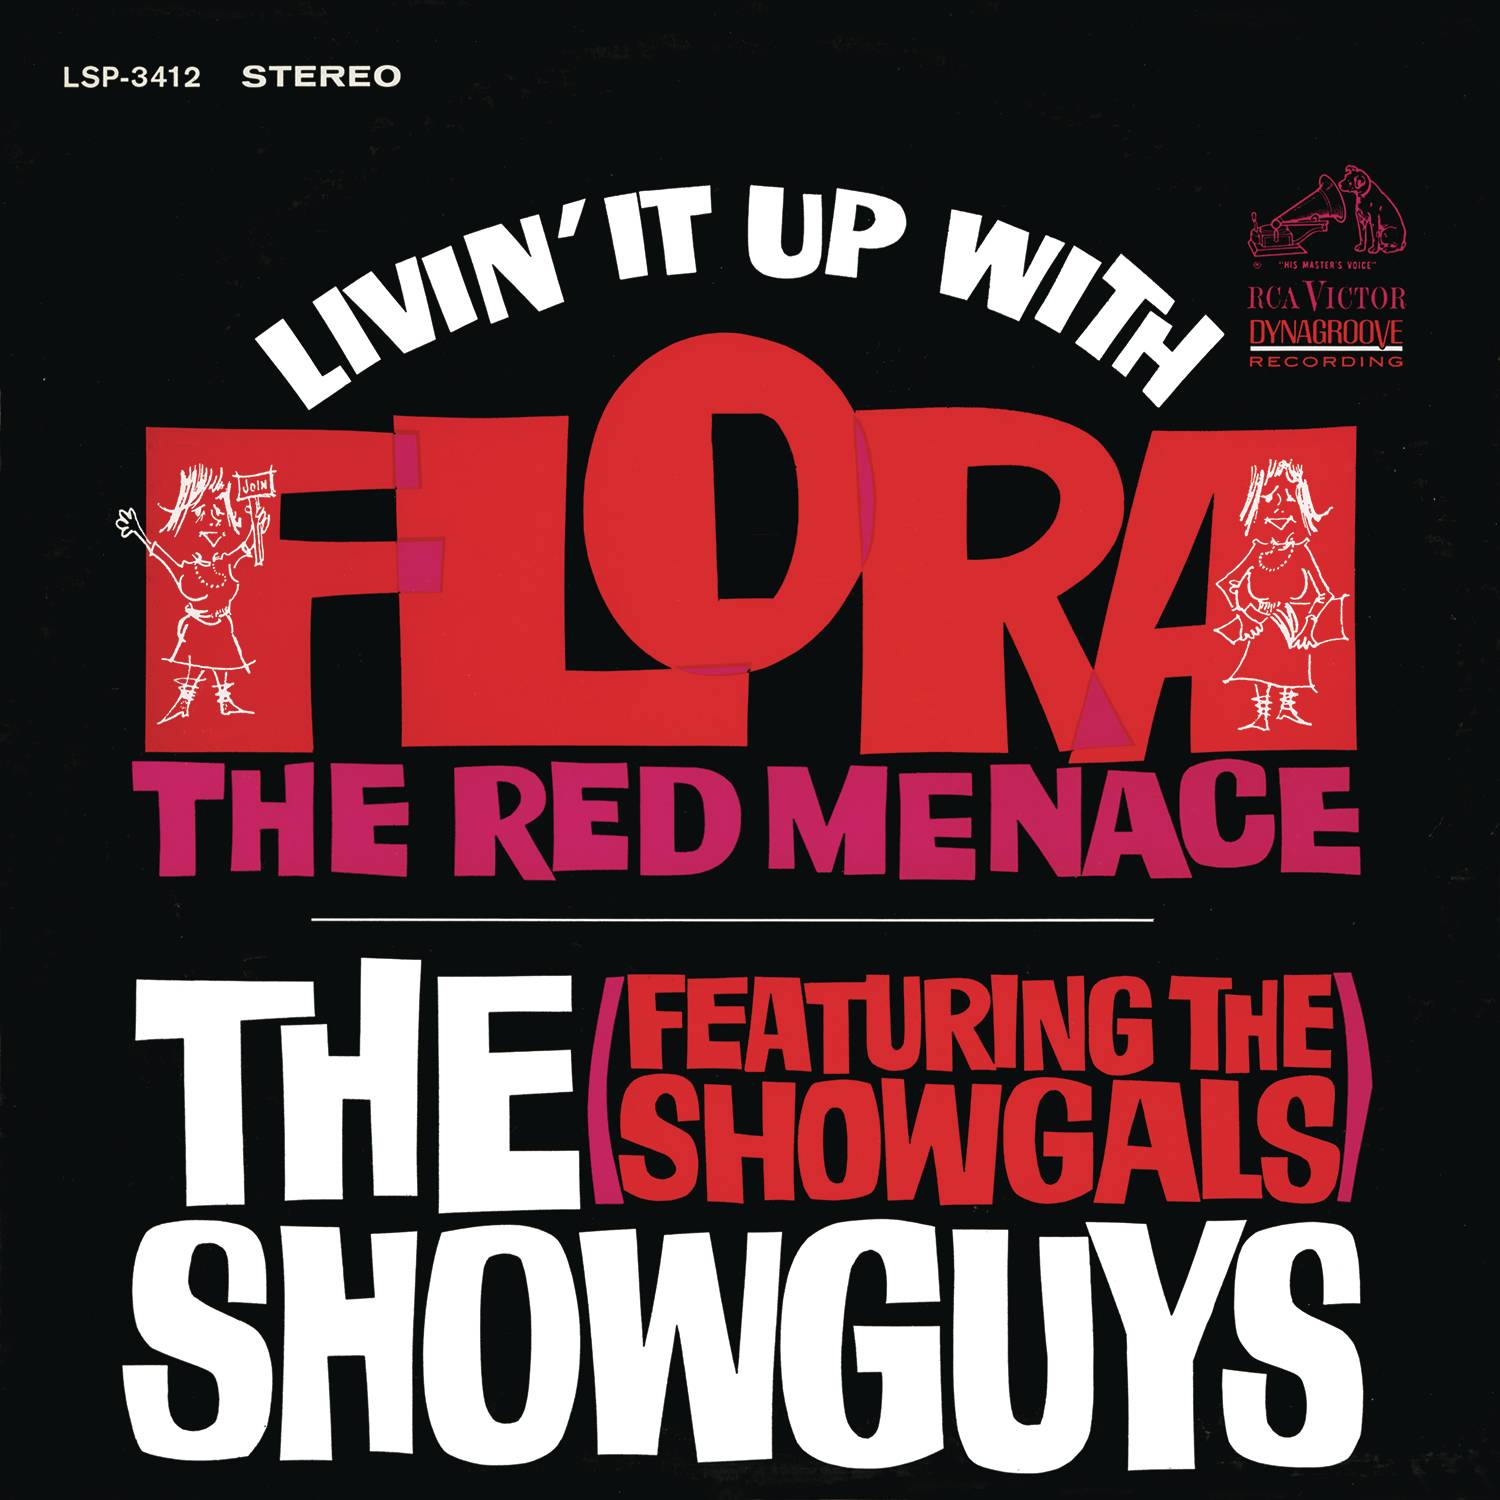 The Showguys feat. The Showgals – Livin’ It Up With Flora, The Red Menace (1965/2015) [AcousticSounds FLAC 24bit/96kHz]